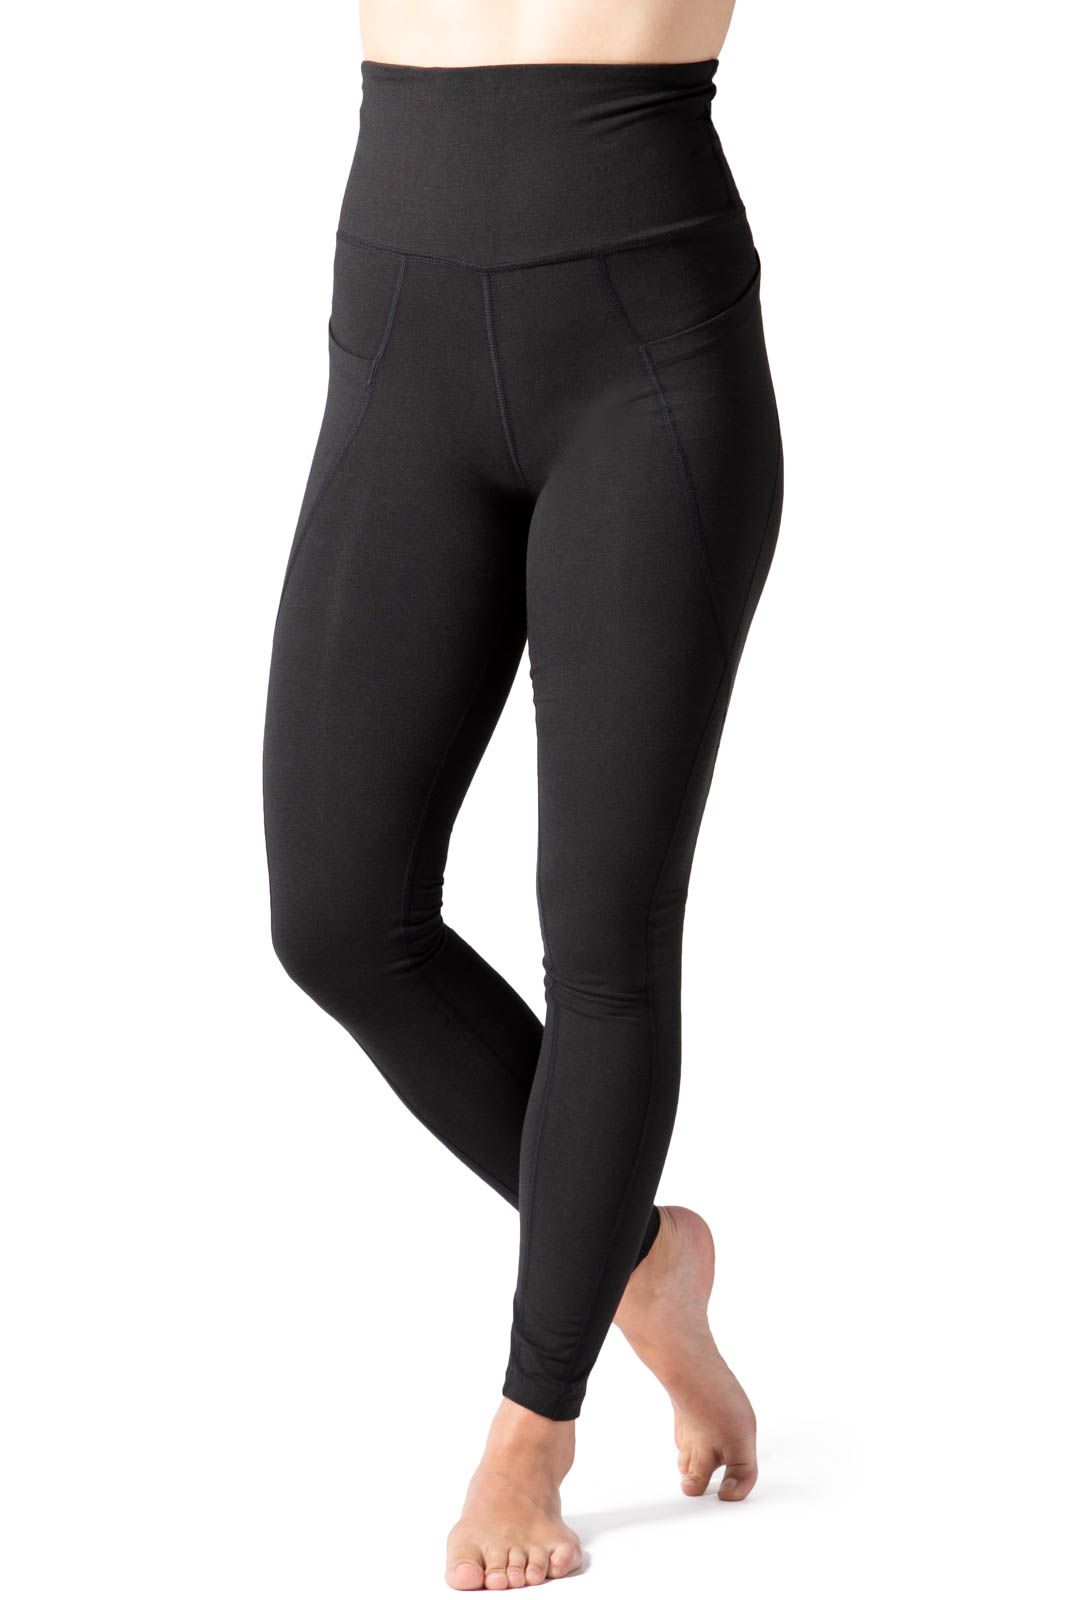 BF Women's Full Length Legging - No Pockets (Embroidered) - The Black Fit  Active Sports Wear